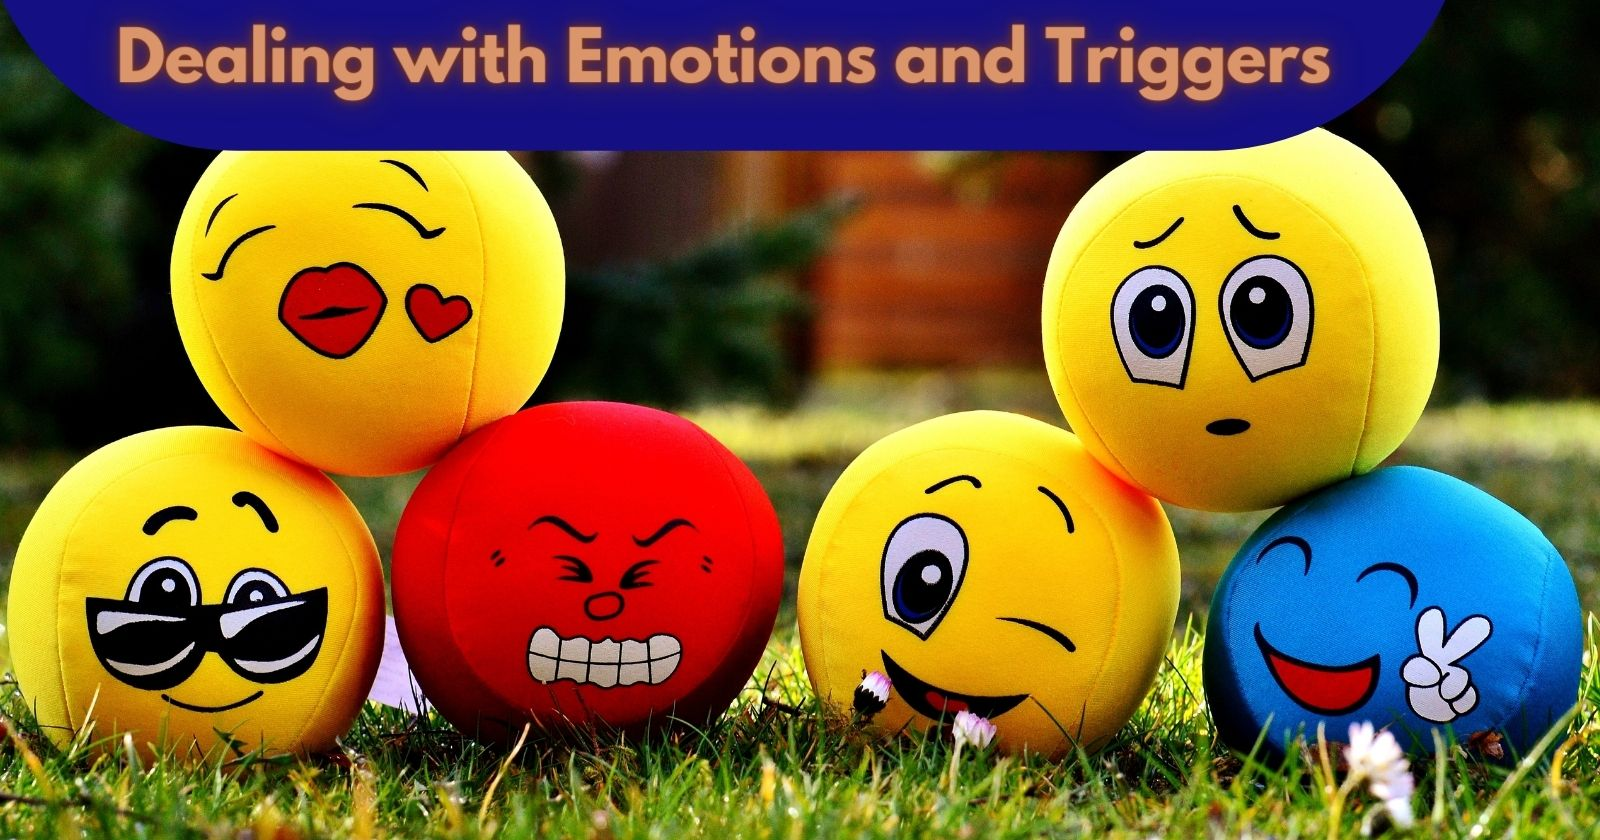 Healing from Trauma
Different face symbols with a text box " Dealing with emotions and triggers"